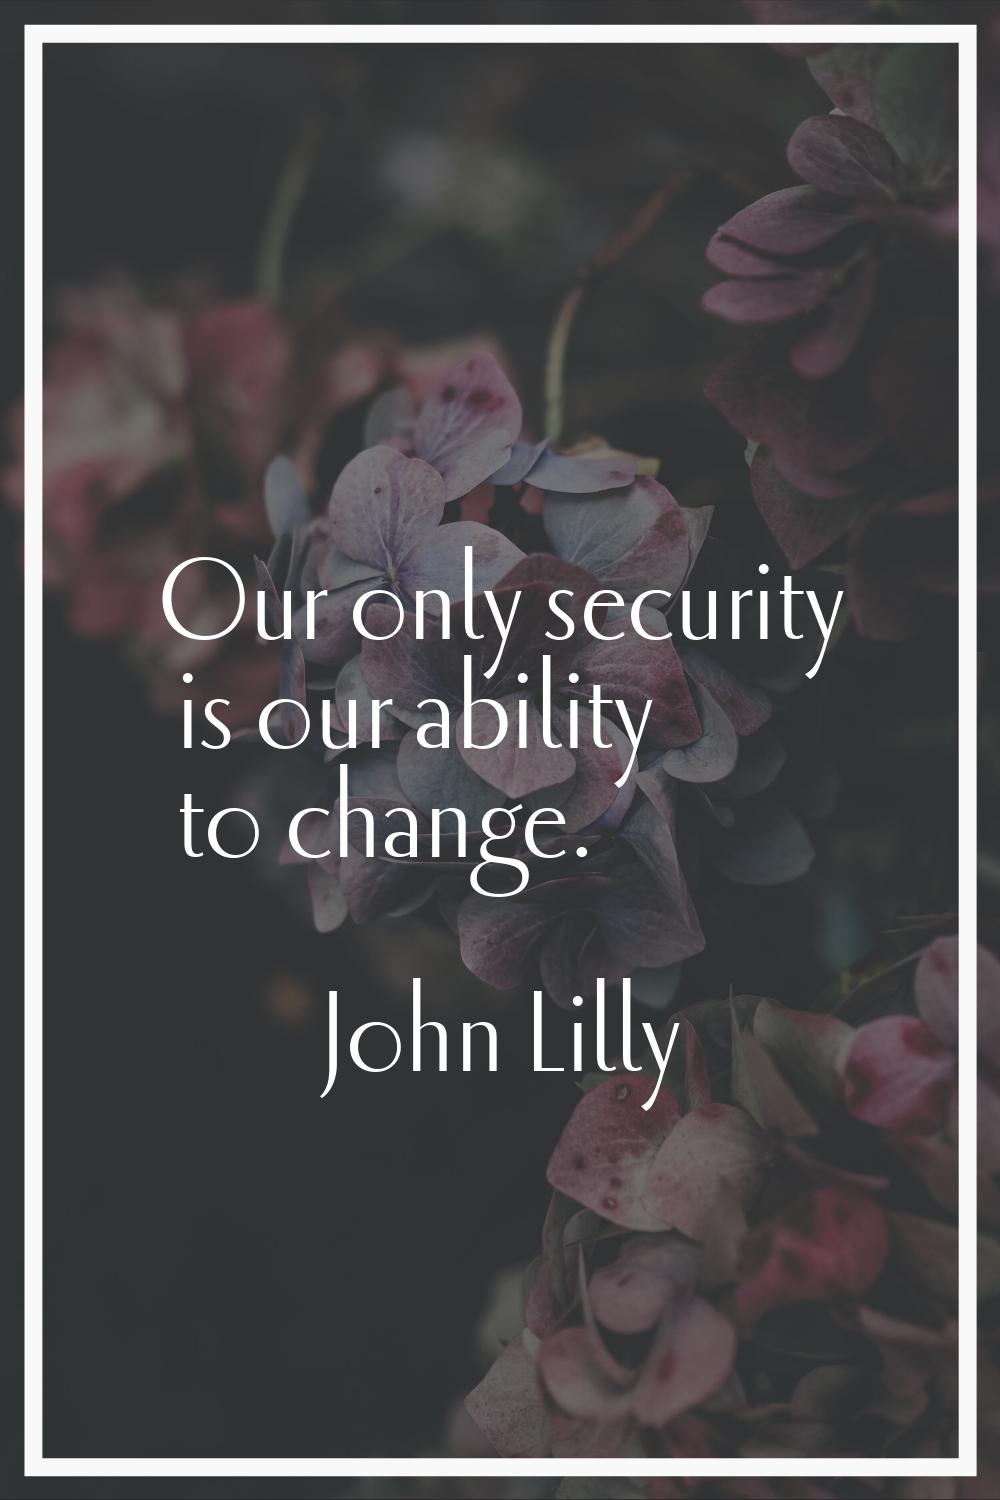 Our only security is our ability to change.